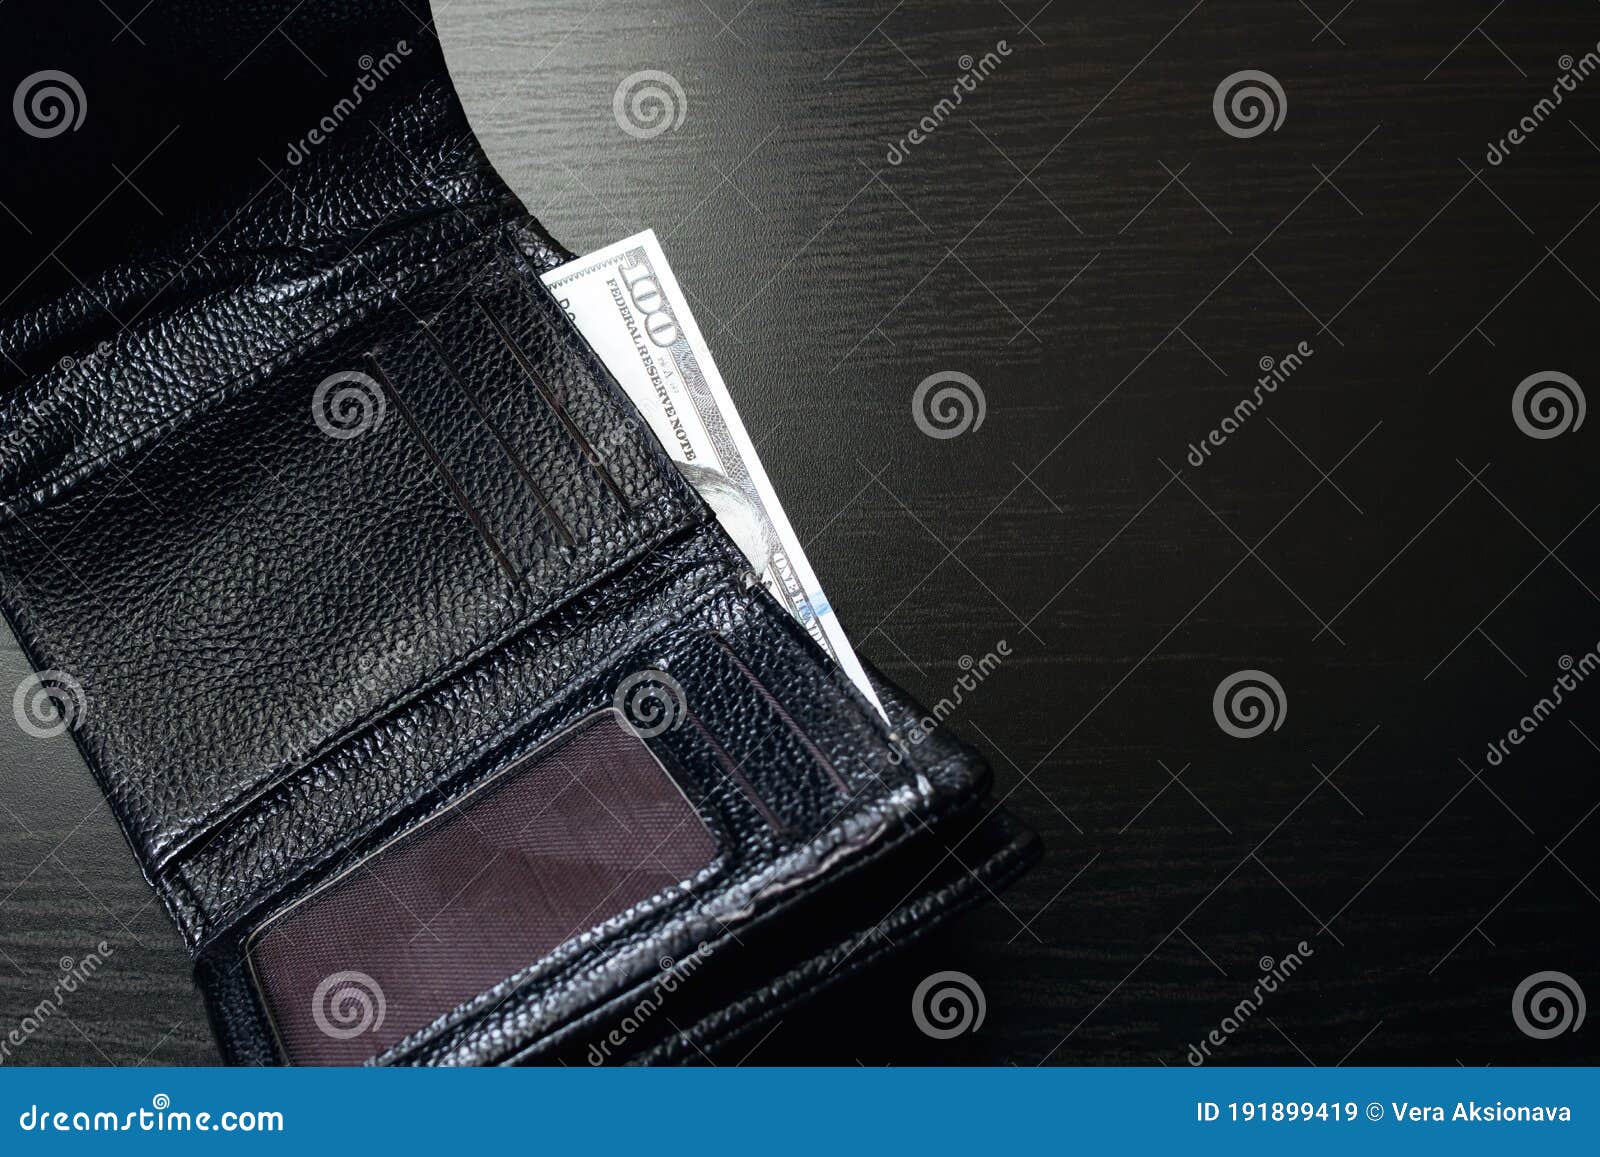 One Hundred Dollar Bill in Black Wallet Stock Image - Image of credit ...